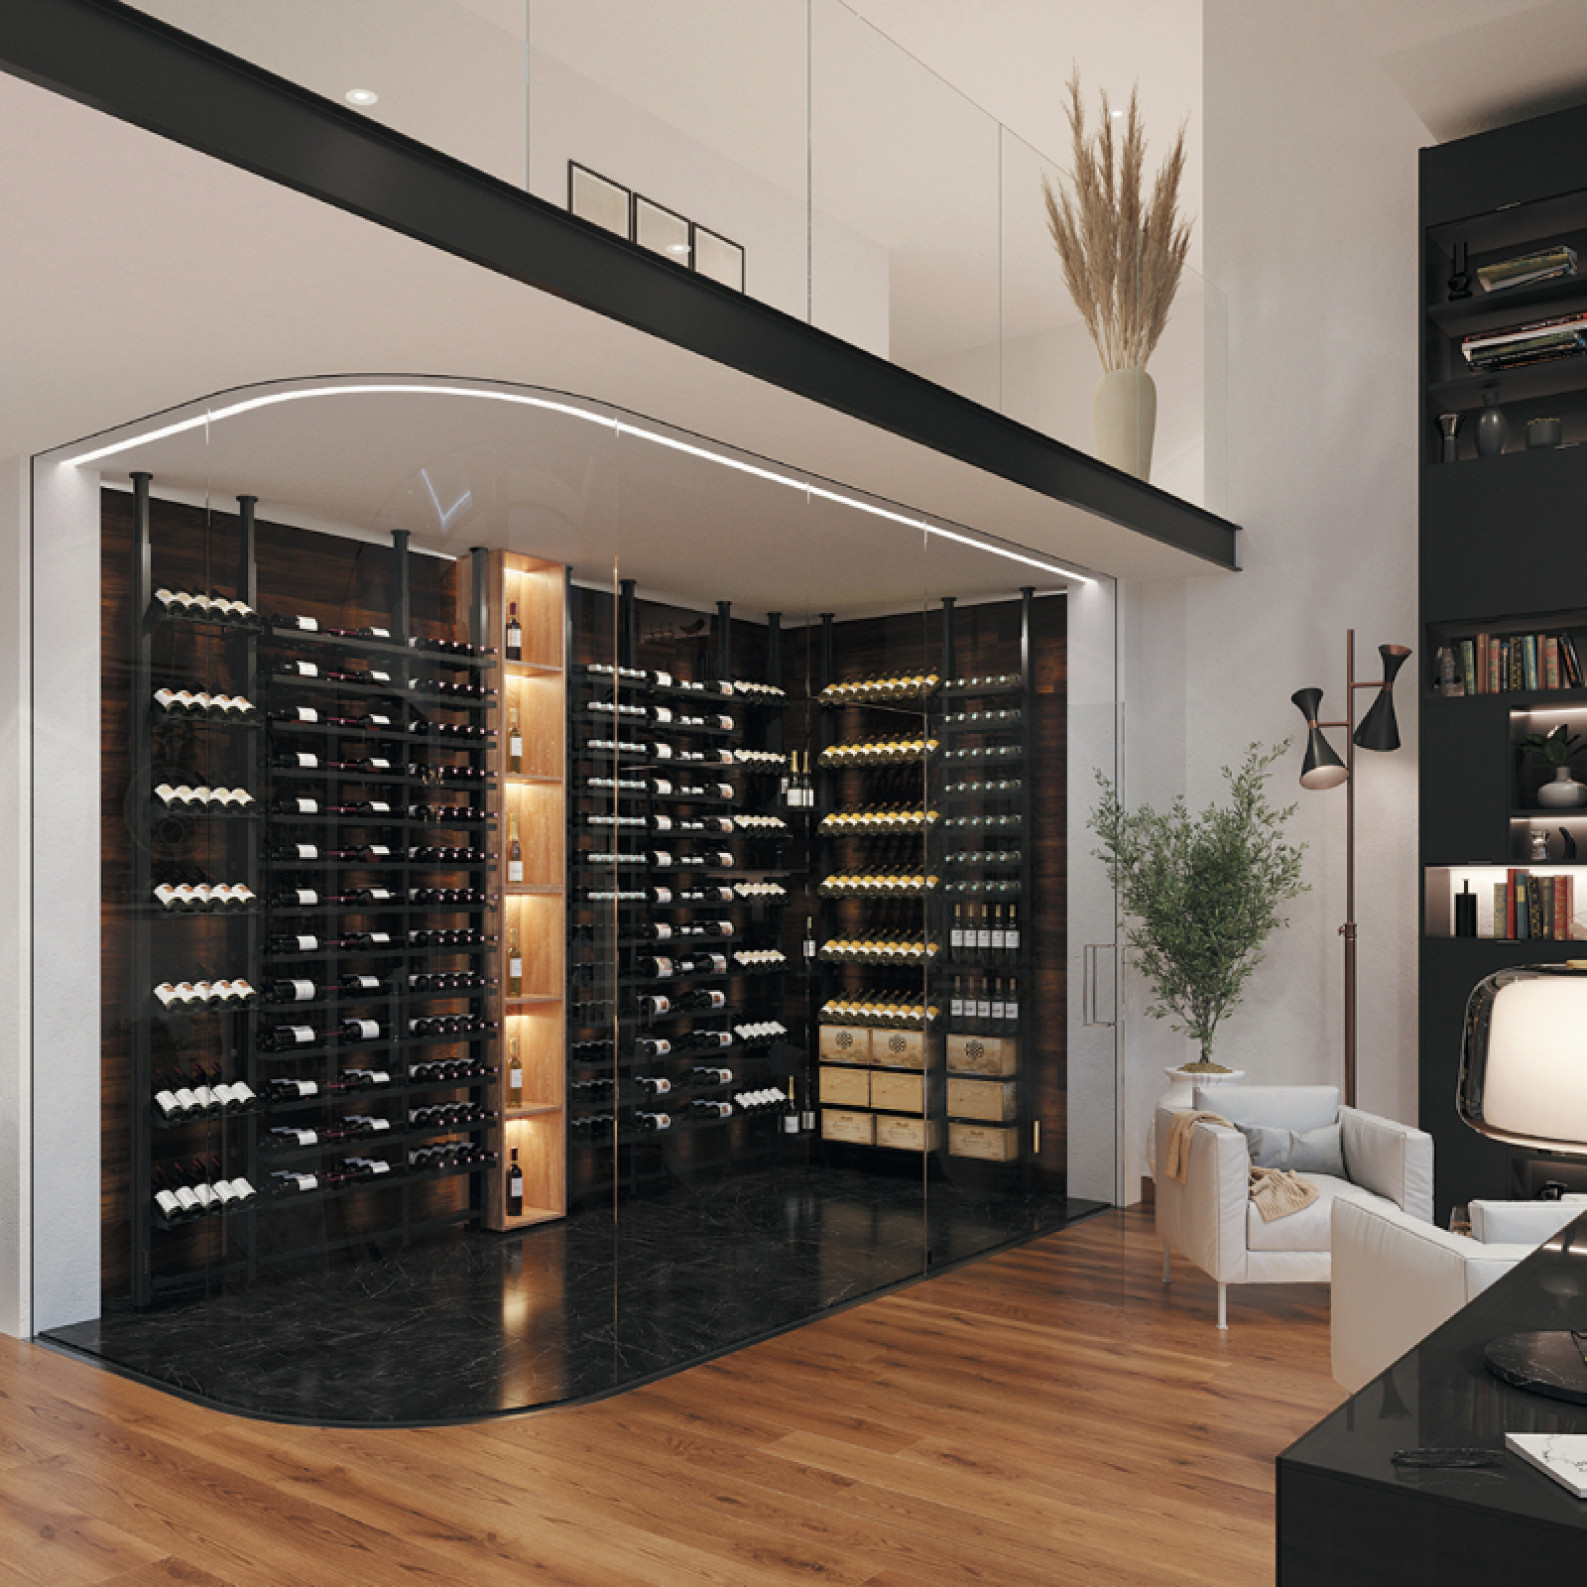 Completely glazed wine area created in a living room